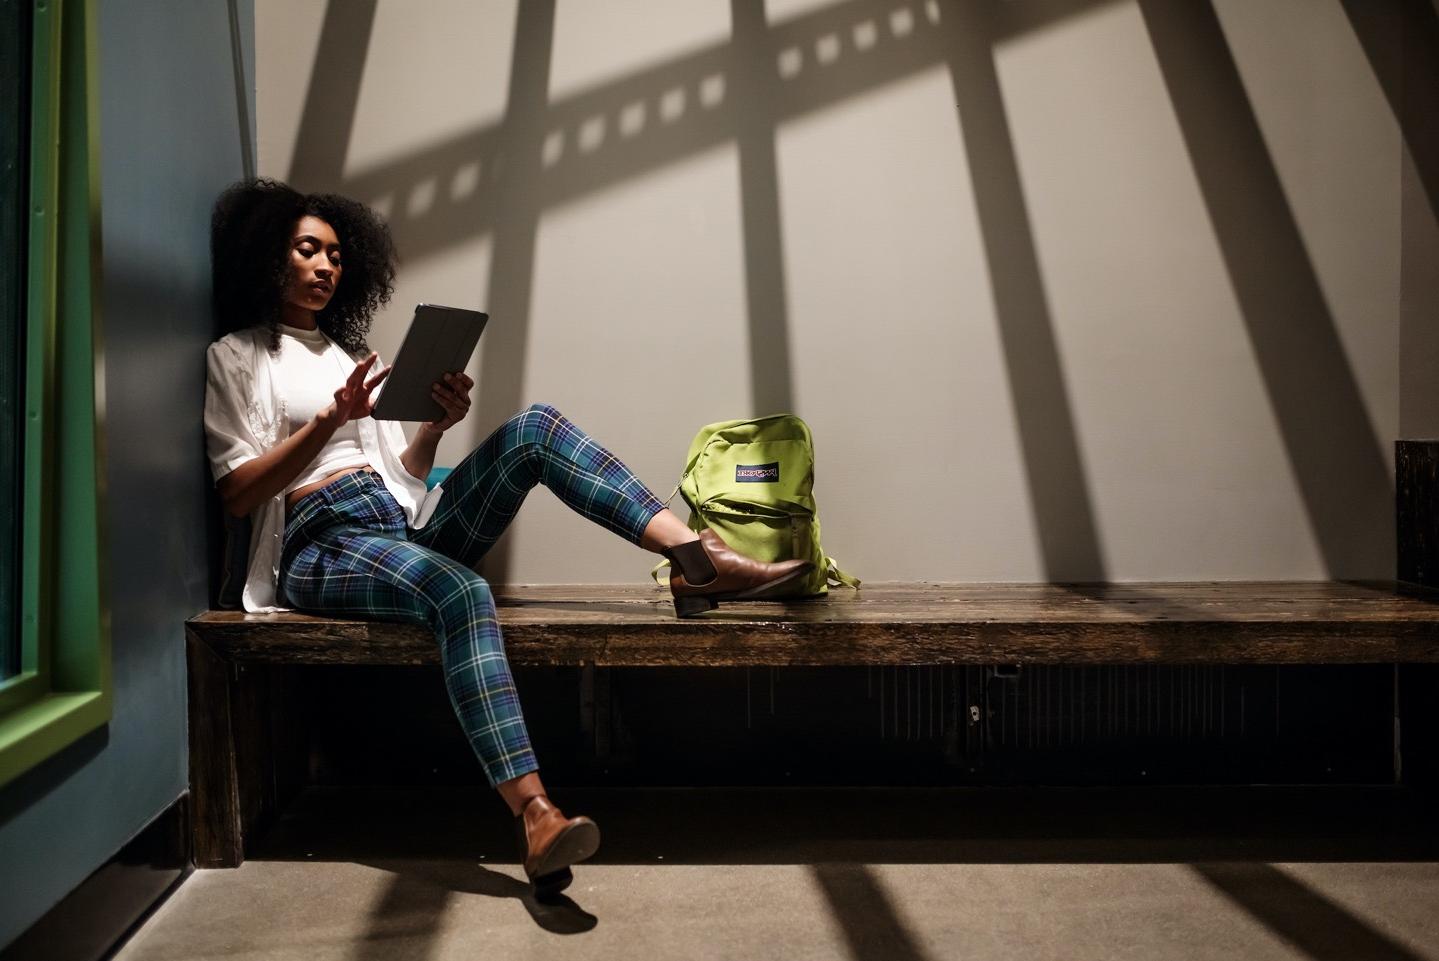 Stylish woman holding tablet & sitting on a bench